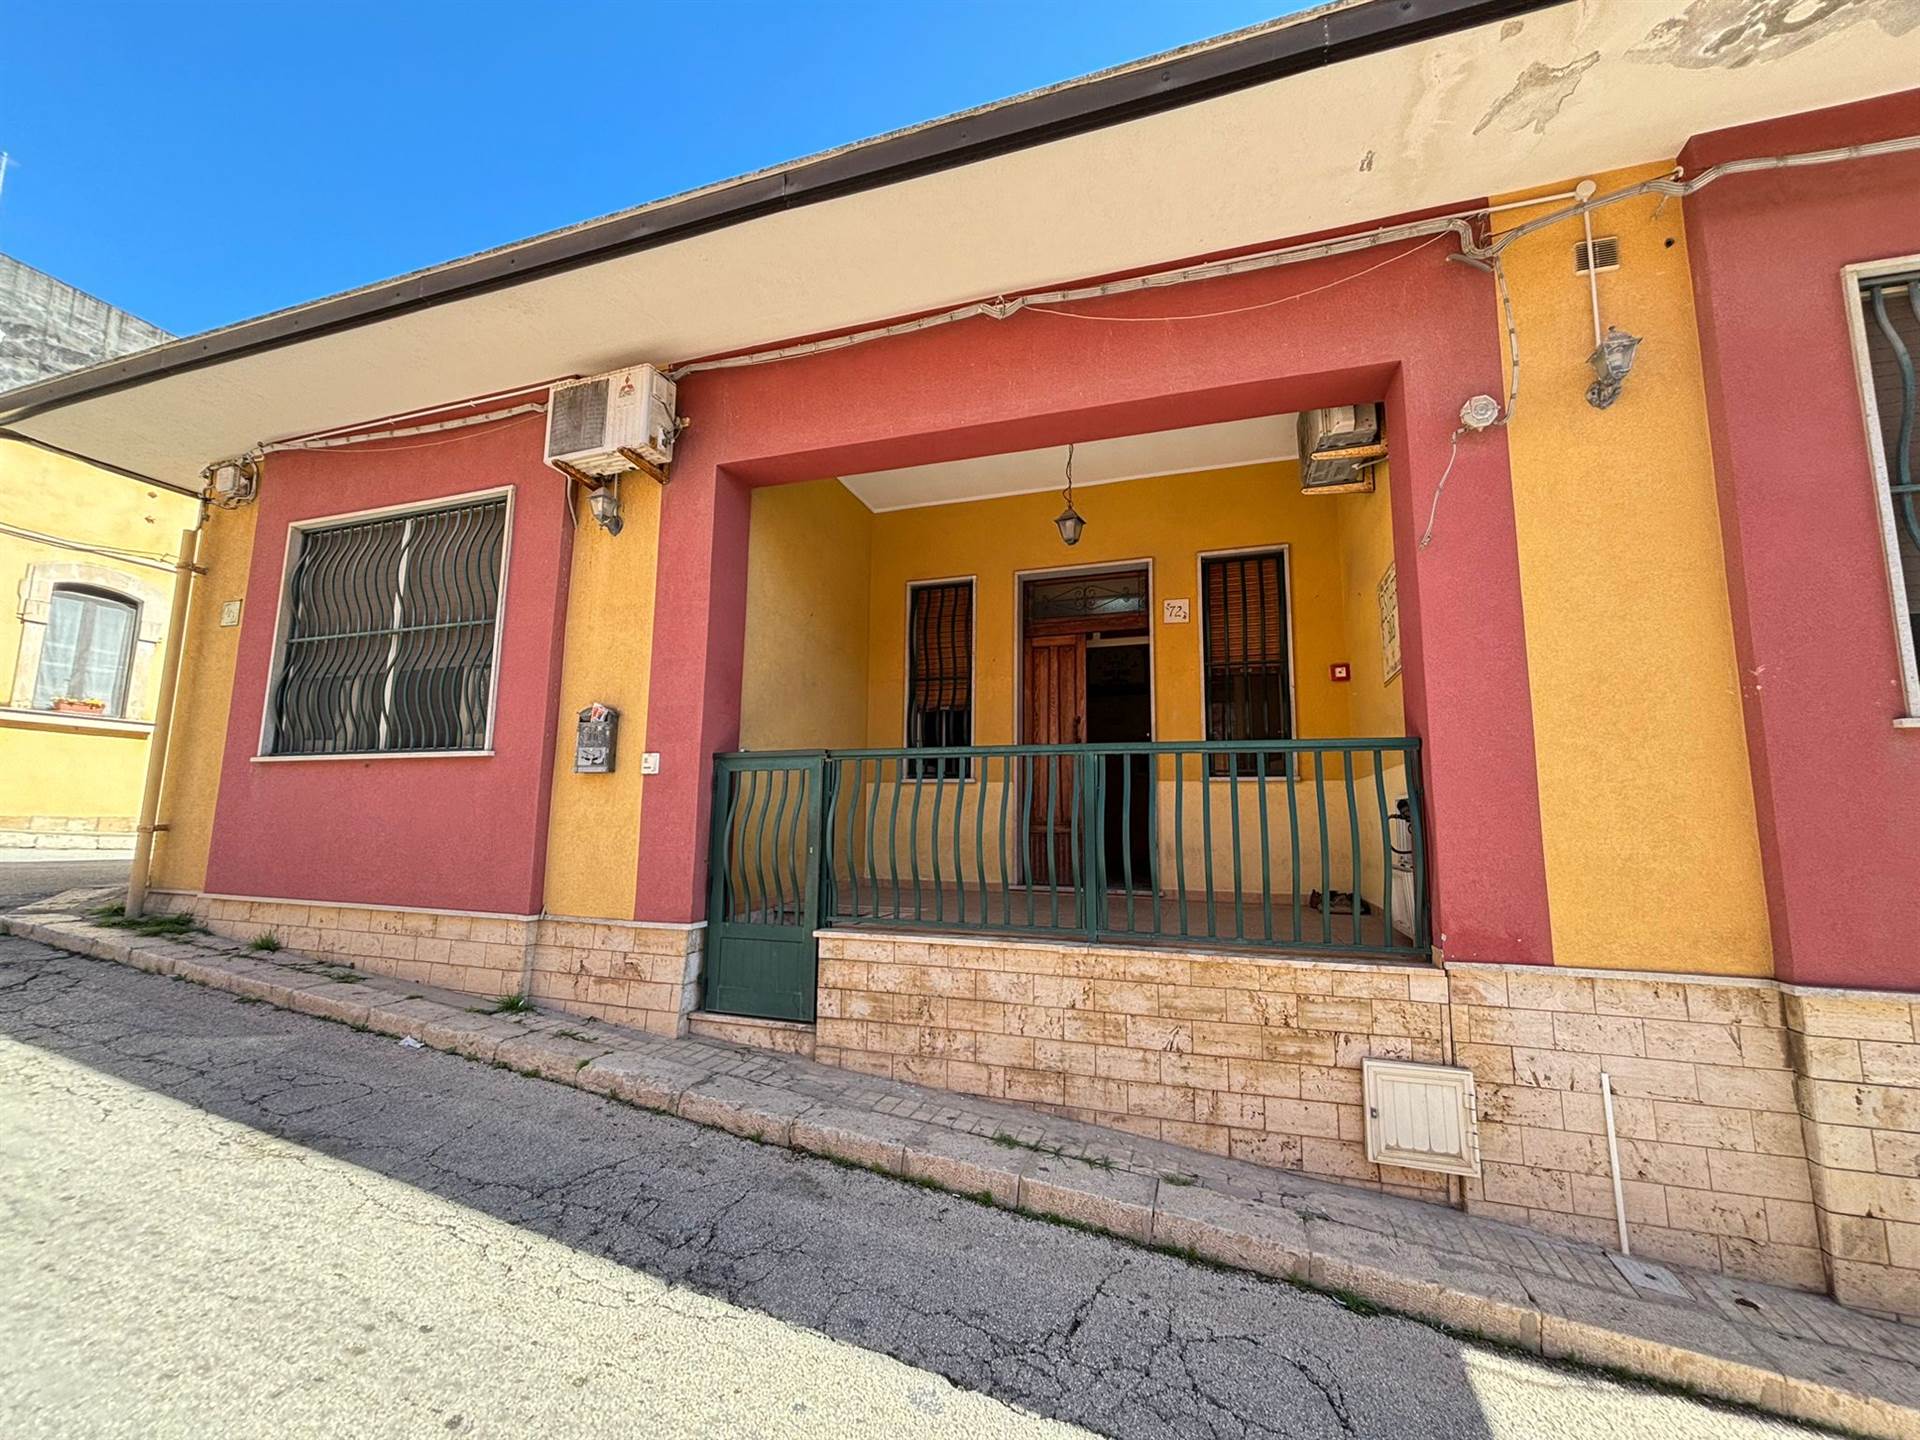 PACHINO, Single house for sale of 178 Sq. mt., Good condition, Energetic class: G, placed at Ground on 3, composed by: 8 Rooms, Separate kitchen, , 5 